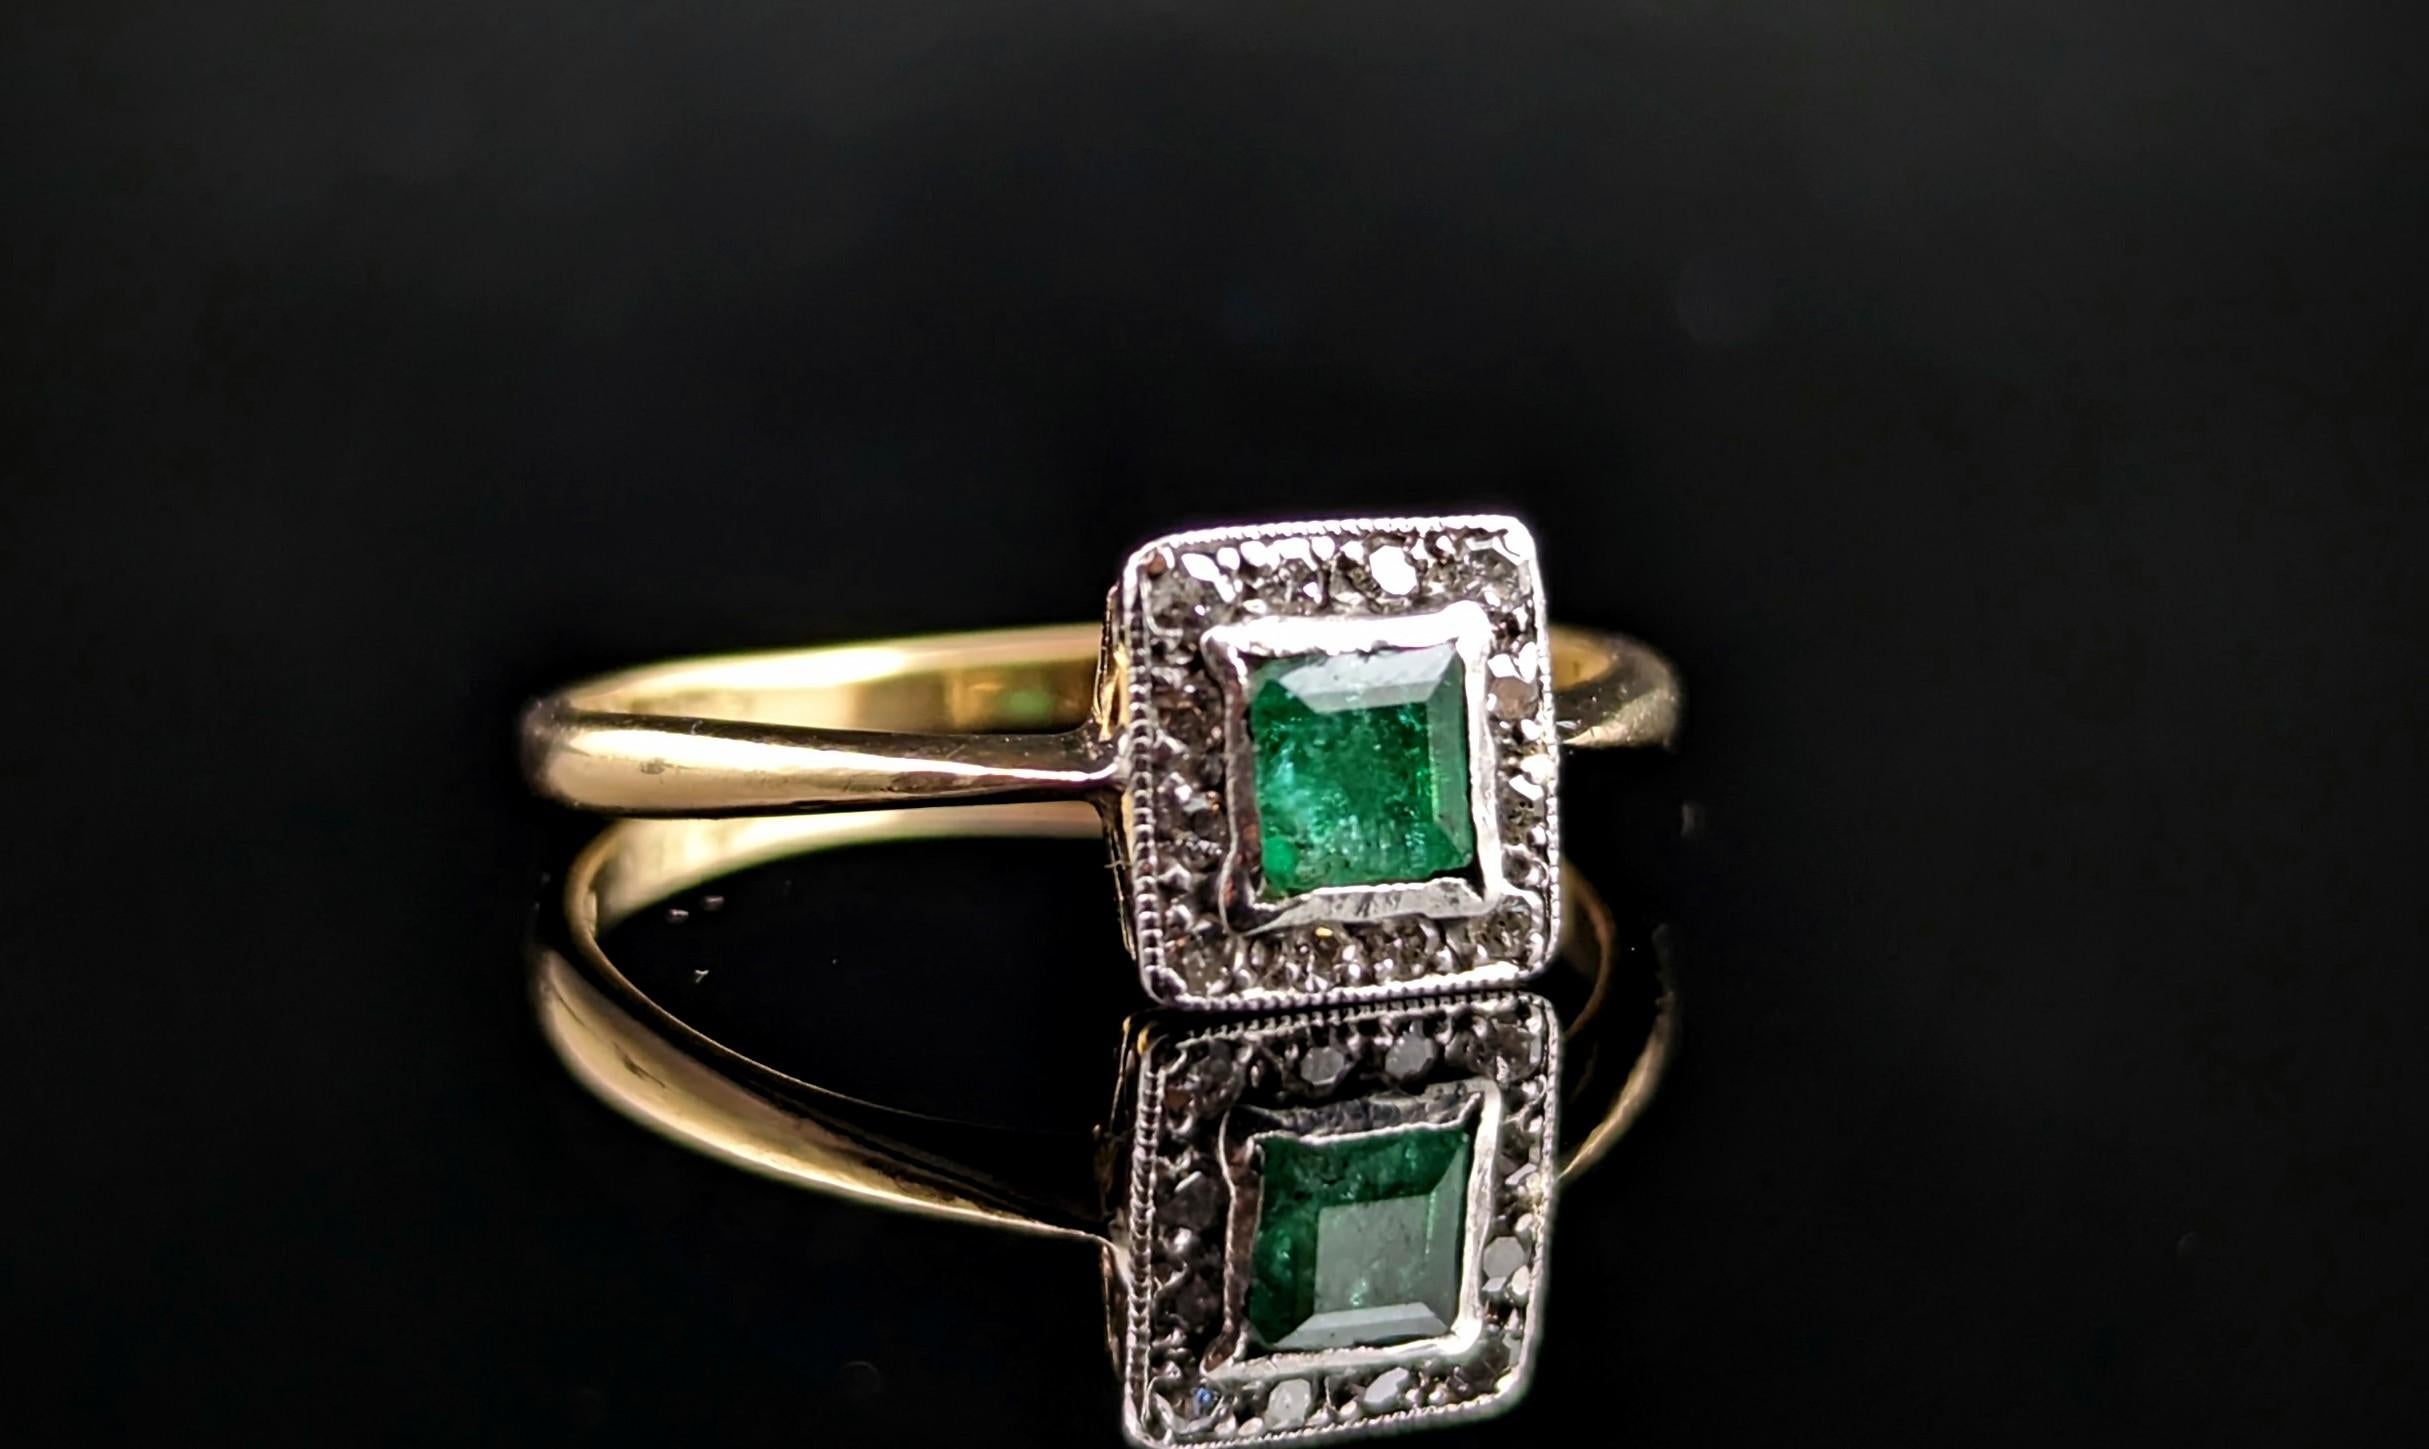 This vintage Art Deco Emerald and Diamond ring exudes Deco luxury.

C1930s it is crafted in rich 18kt yellow gold with a platinum set face, the face is set with a halo of sparkling diamond chips,the diamonds framing the beautiful lush green emerald